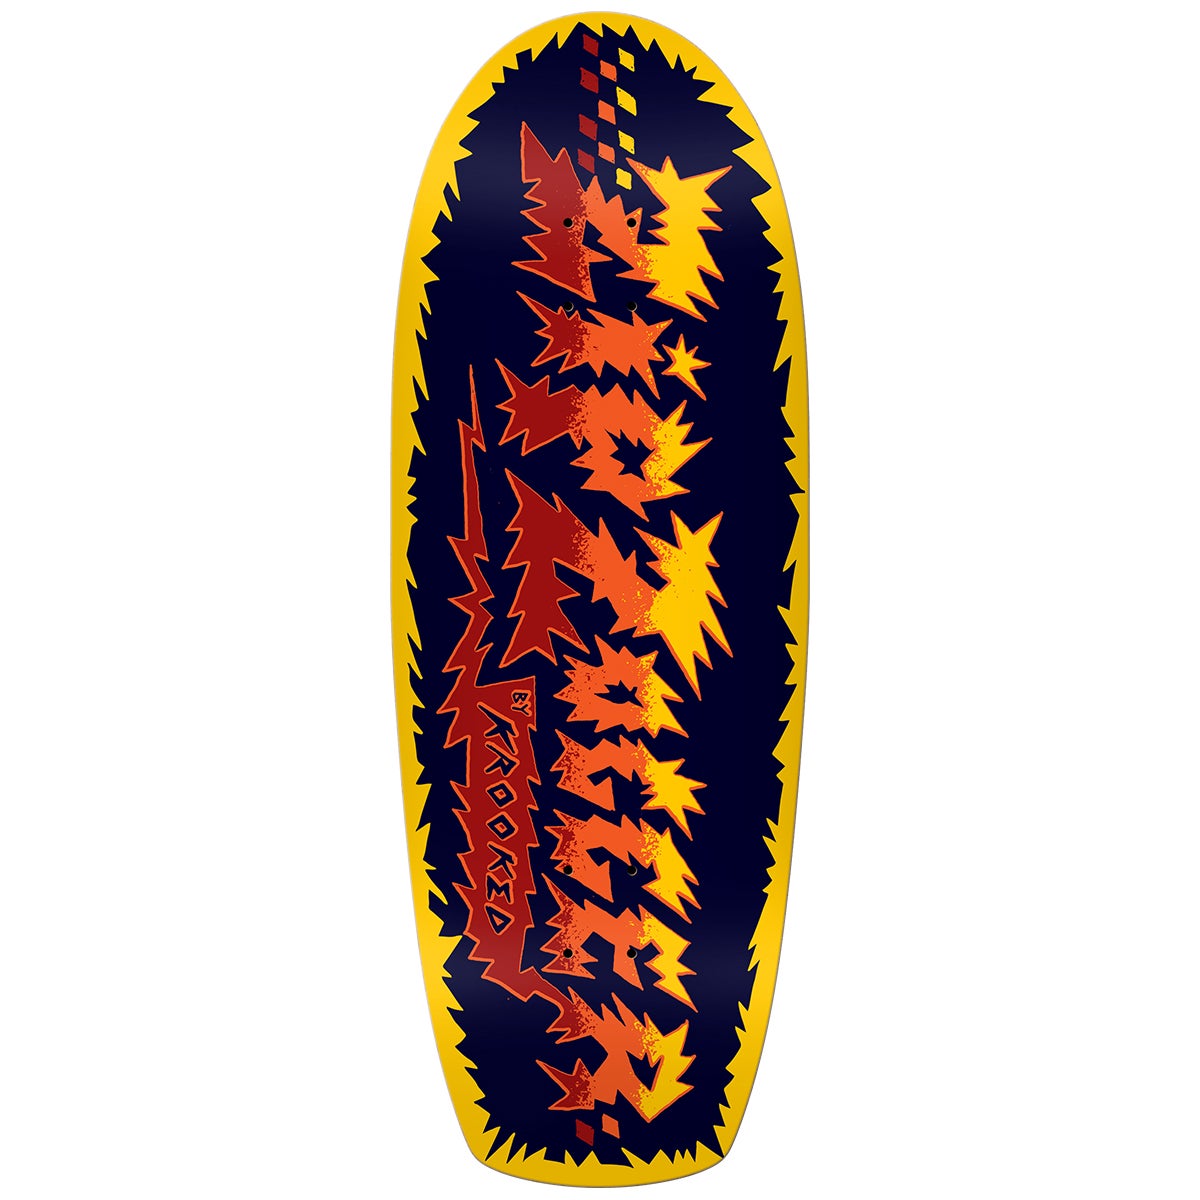 KROOKED DECK ZIP ZOGGER BY SAM D (10.75") - The Drive Skateshop